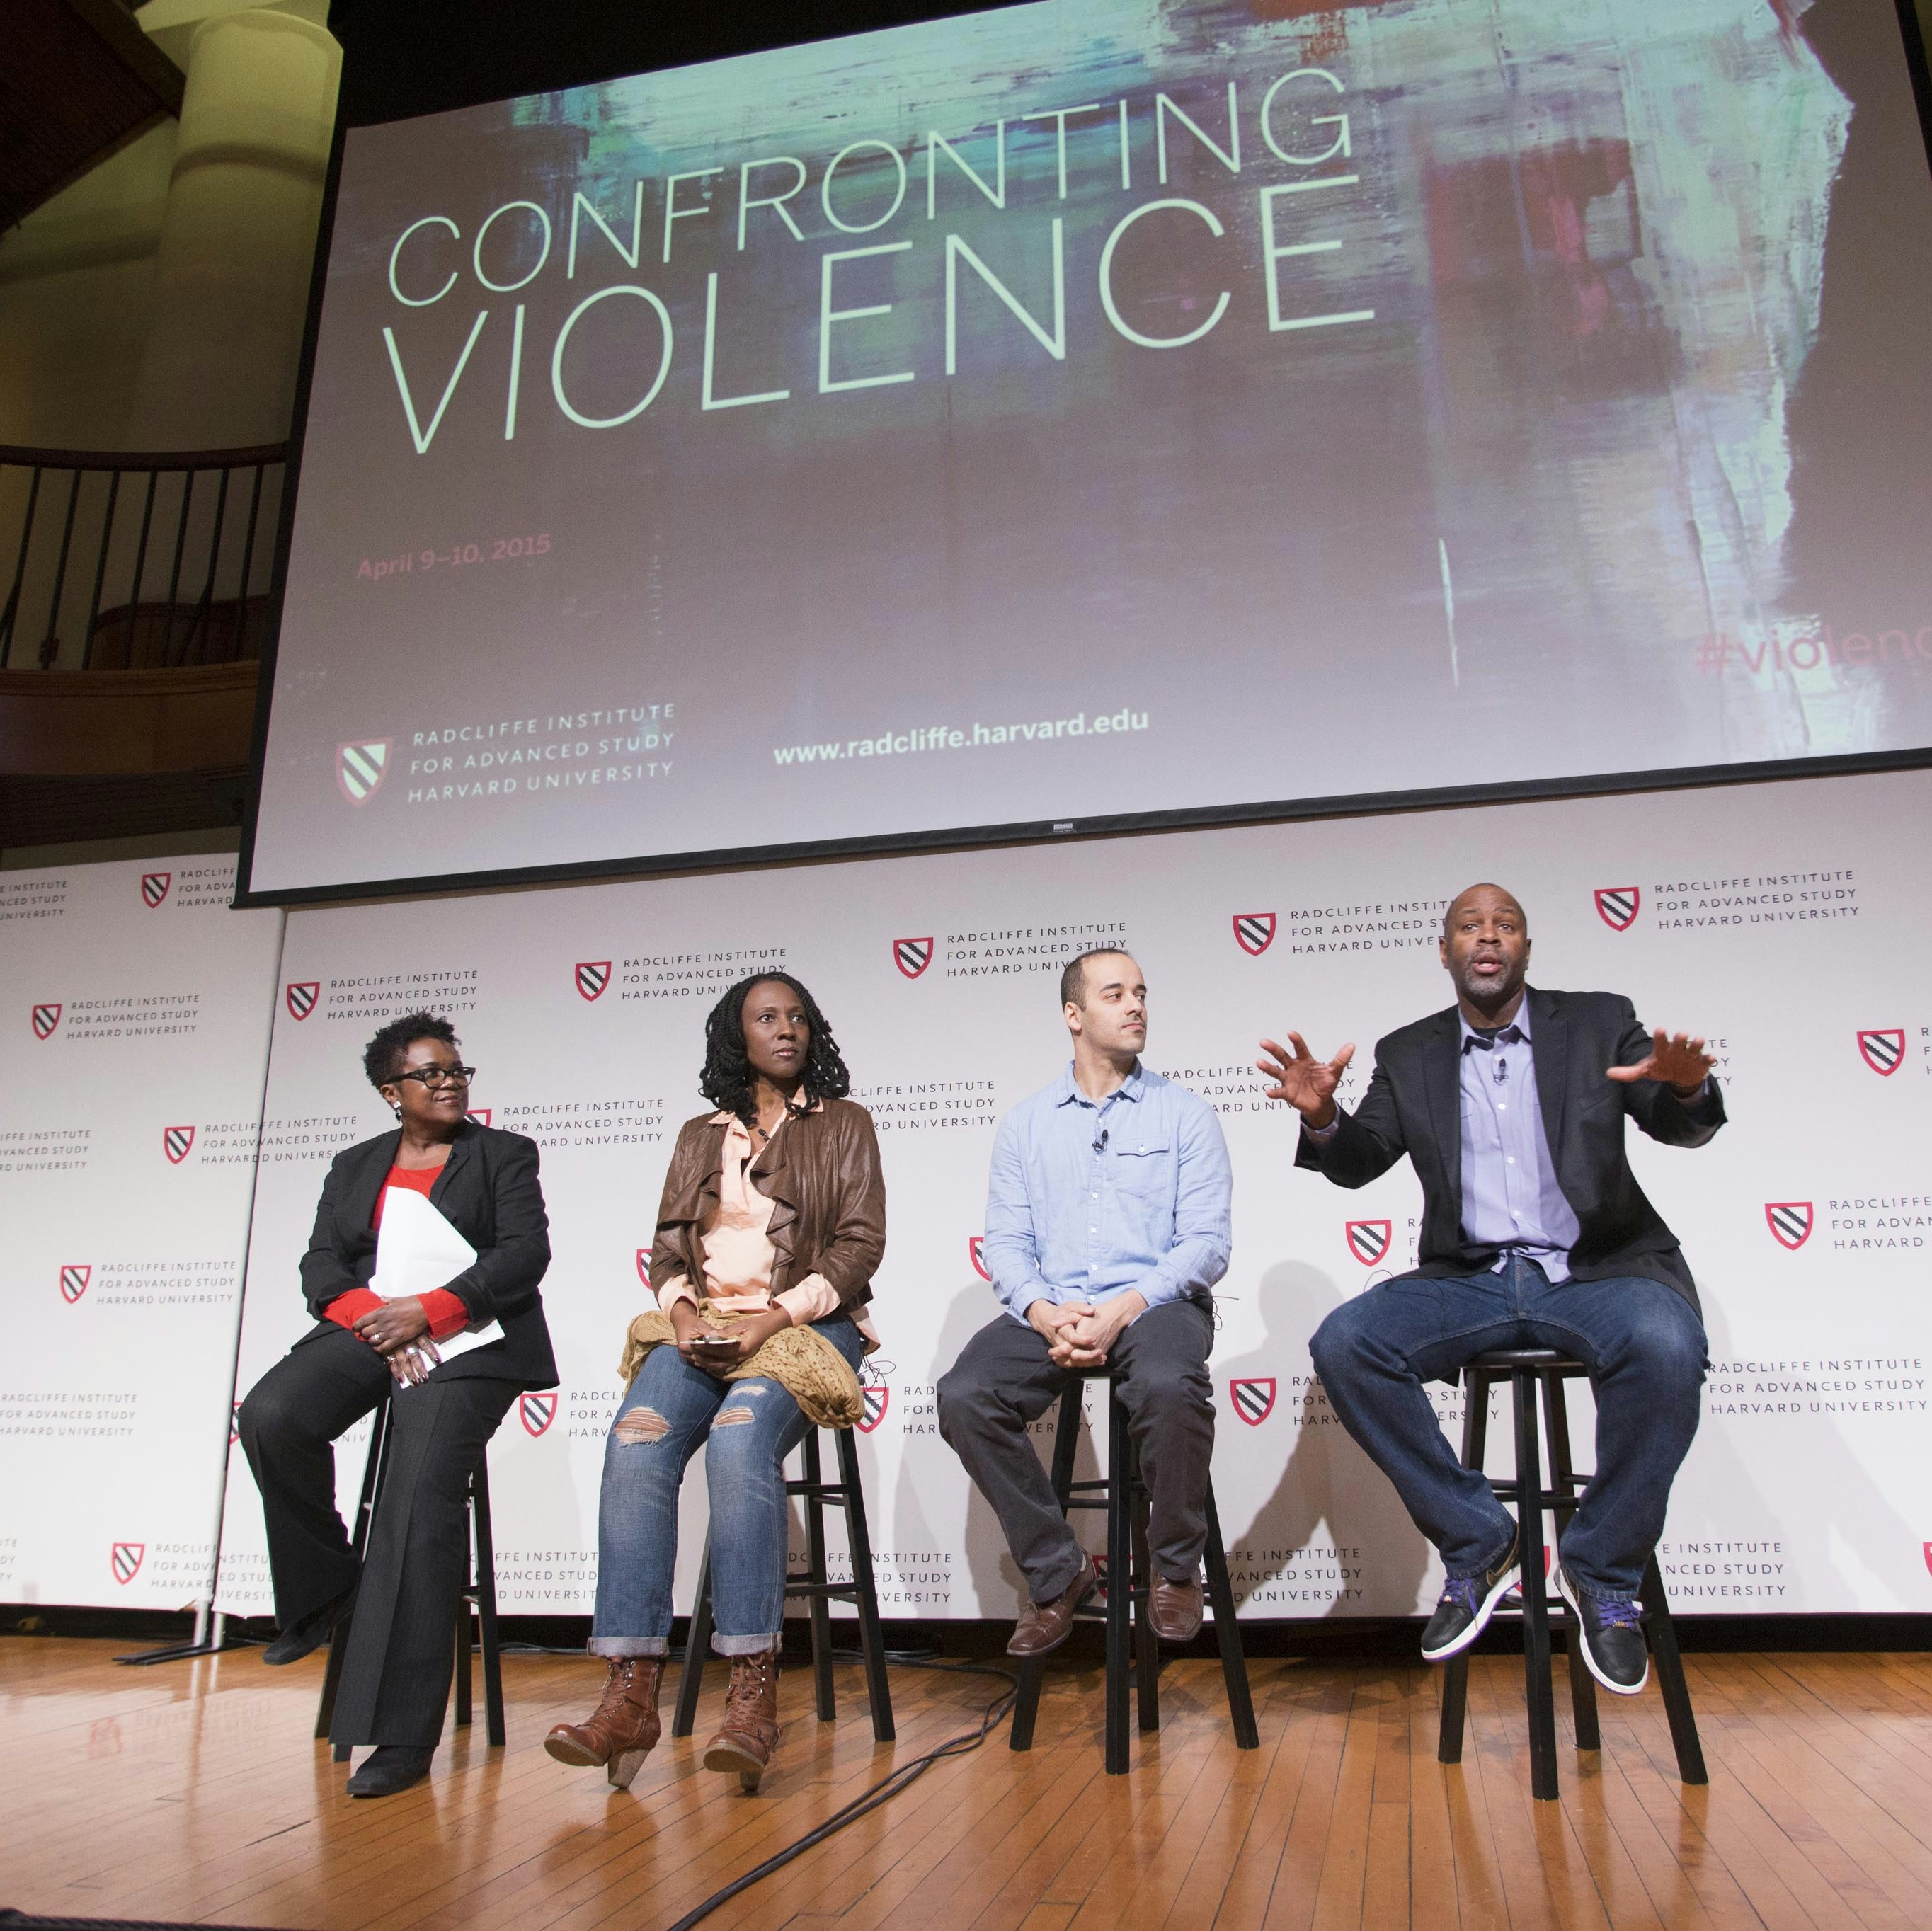 Panel having a discussion at "Confronting Violence"